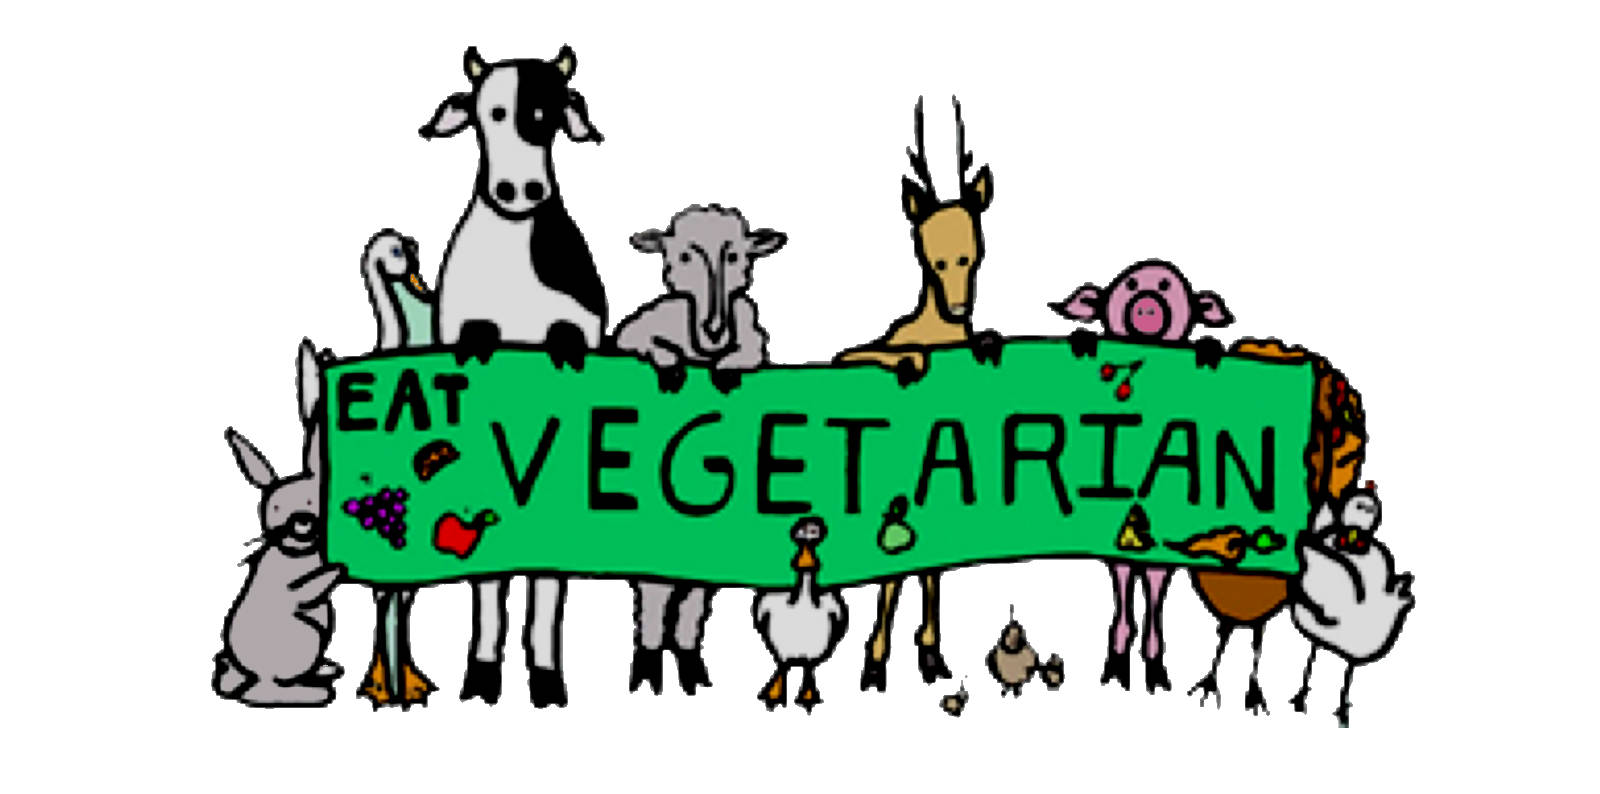 Vegetarian Is It Better Than Eating Meat